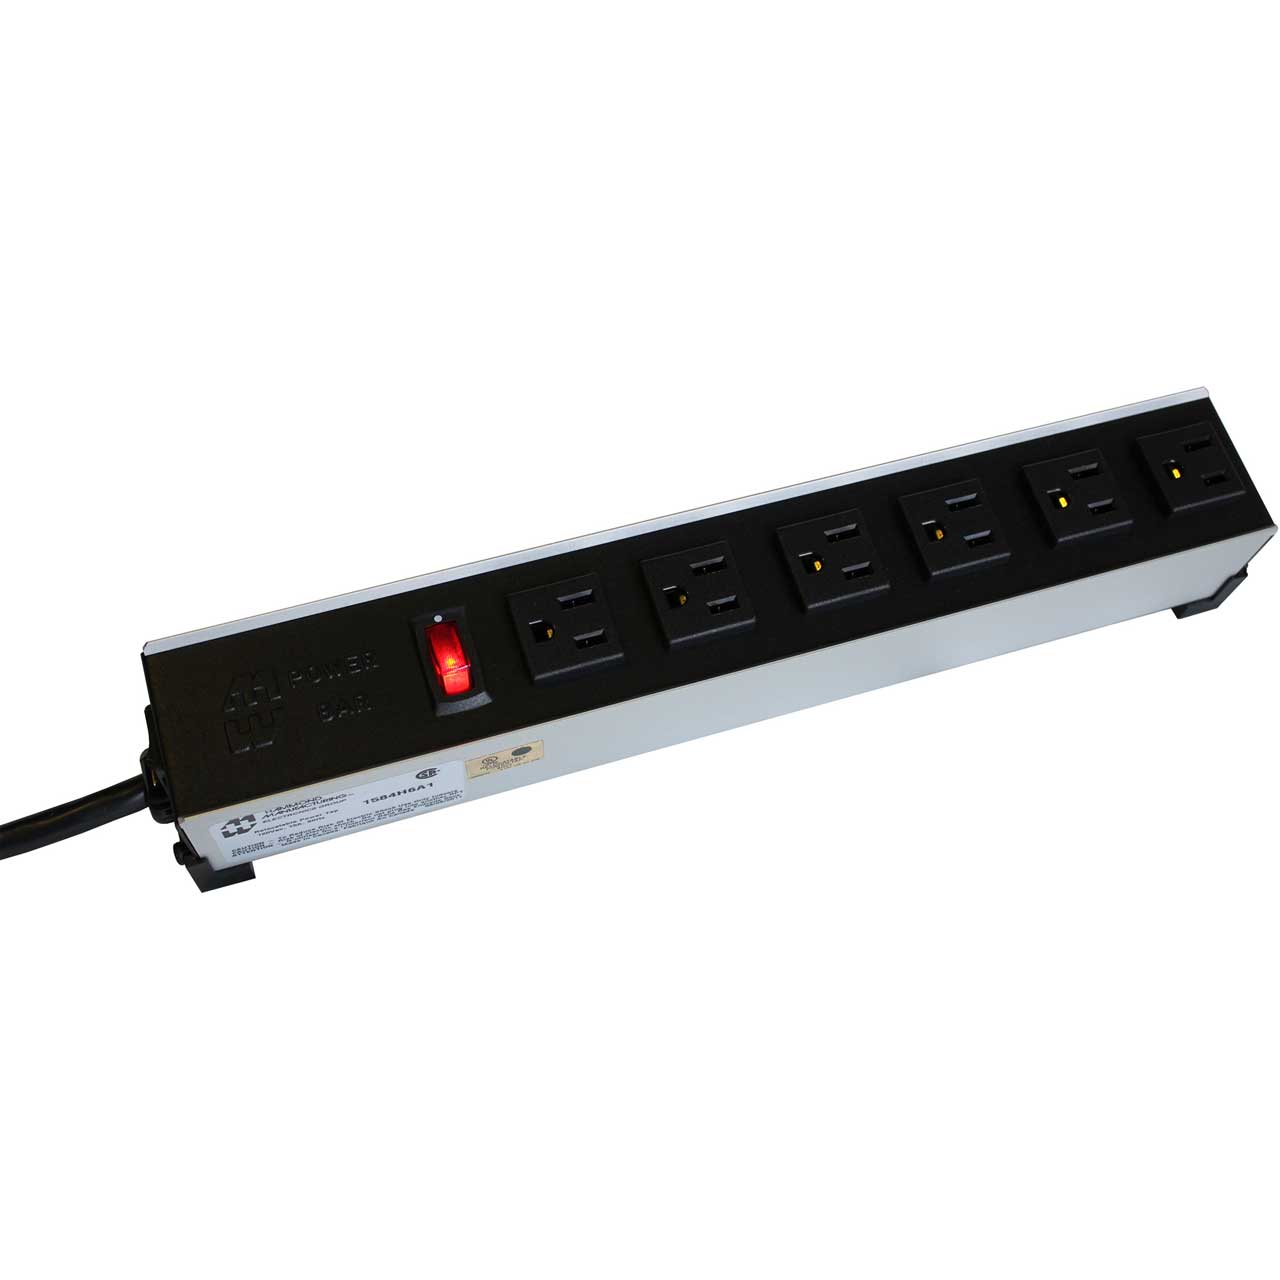 Hammond 1584H4A1 15A H.D. - 4 Outlet Strip w/ Switch - 6 Foot Cord - Outlets Front - Rocker Type On/Off Switch - Black HMND-1584H4A1